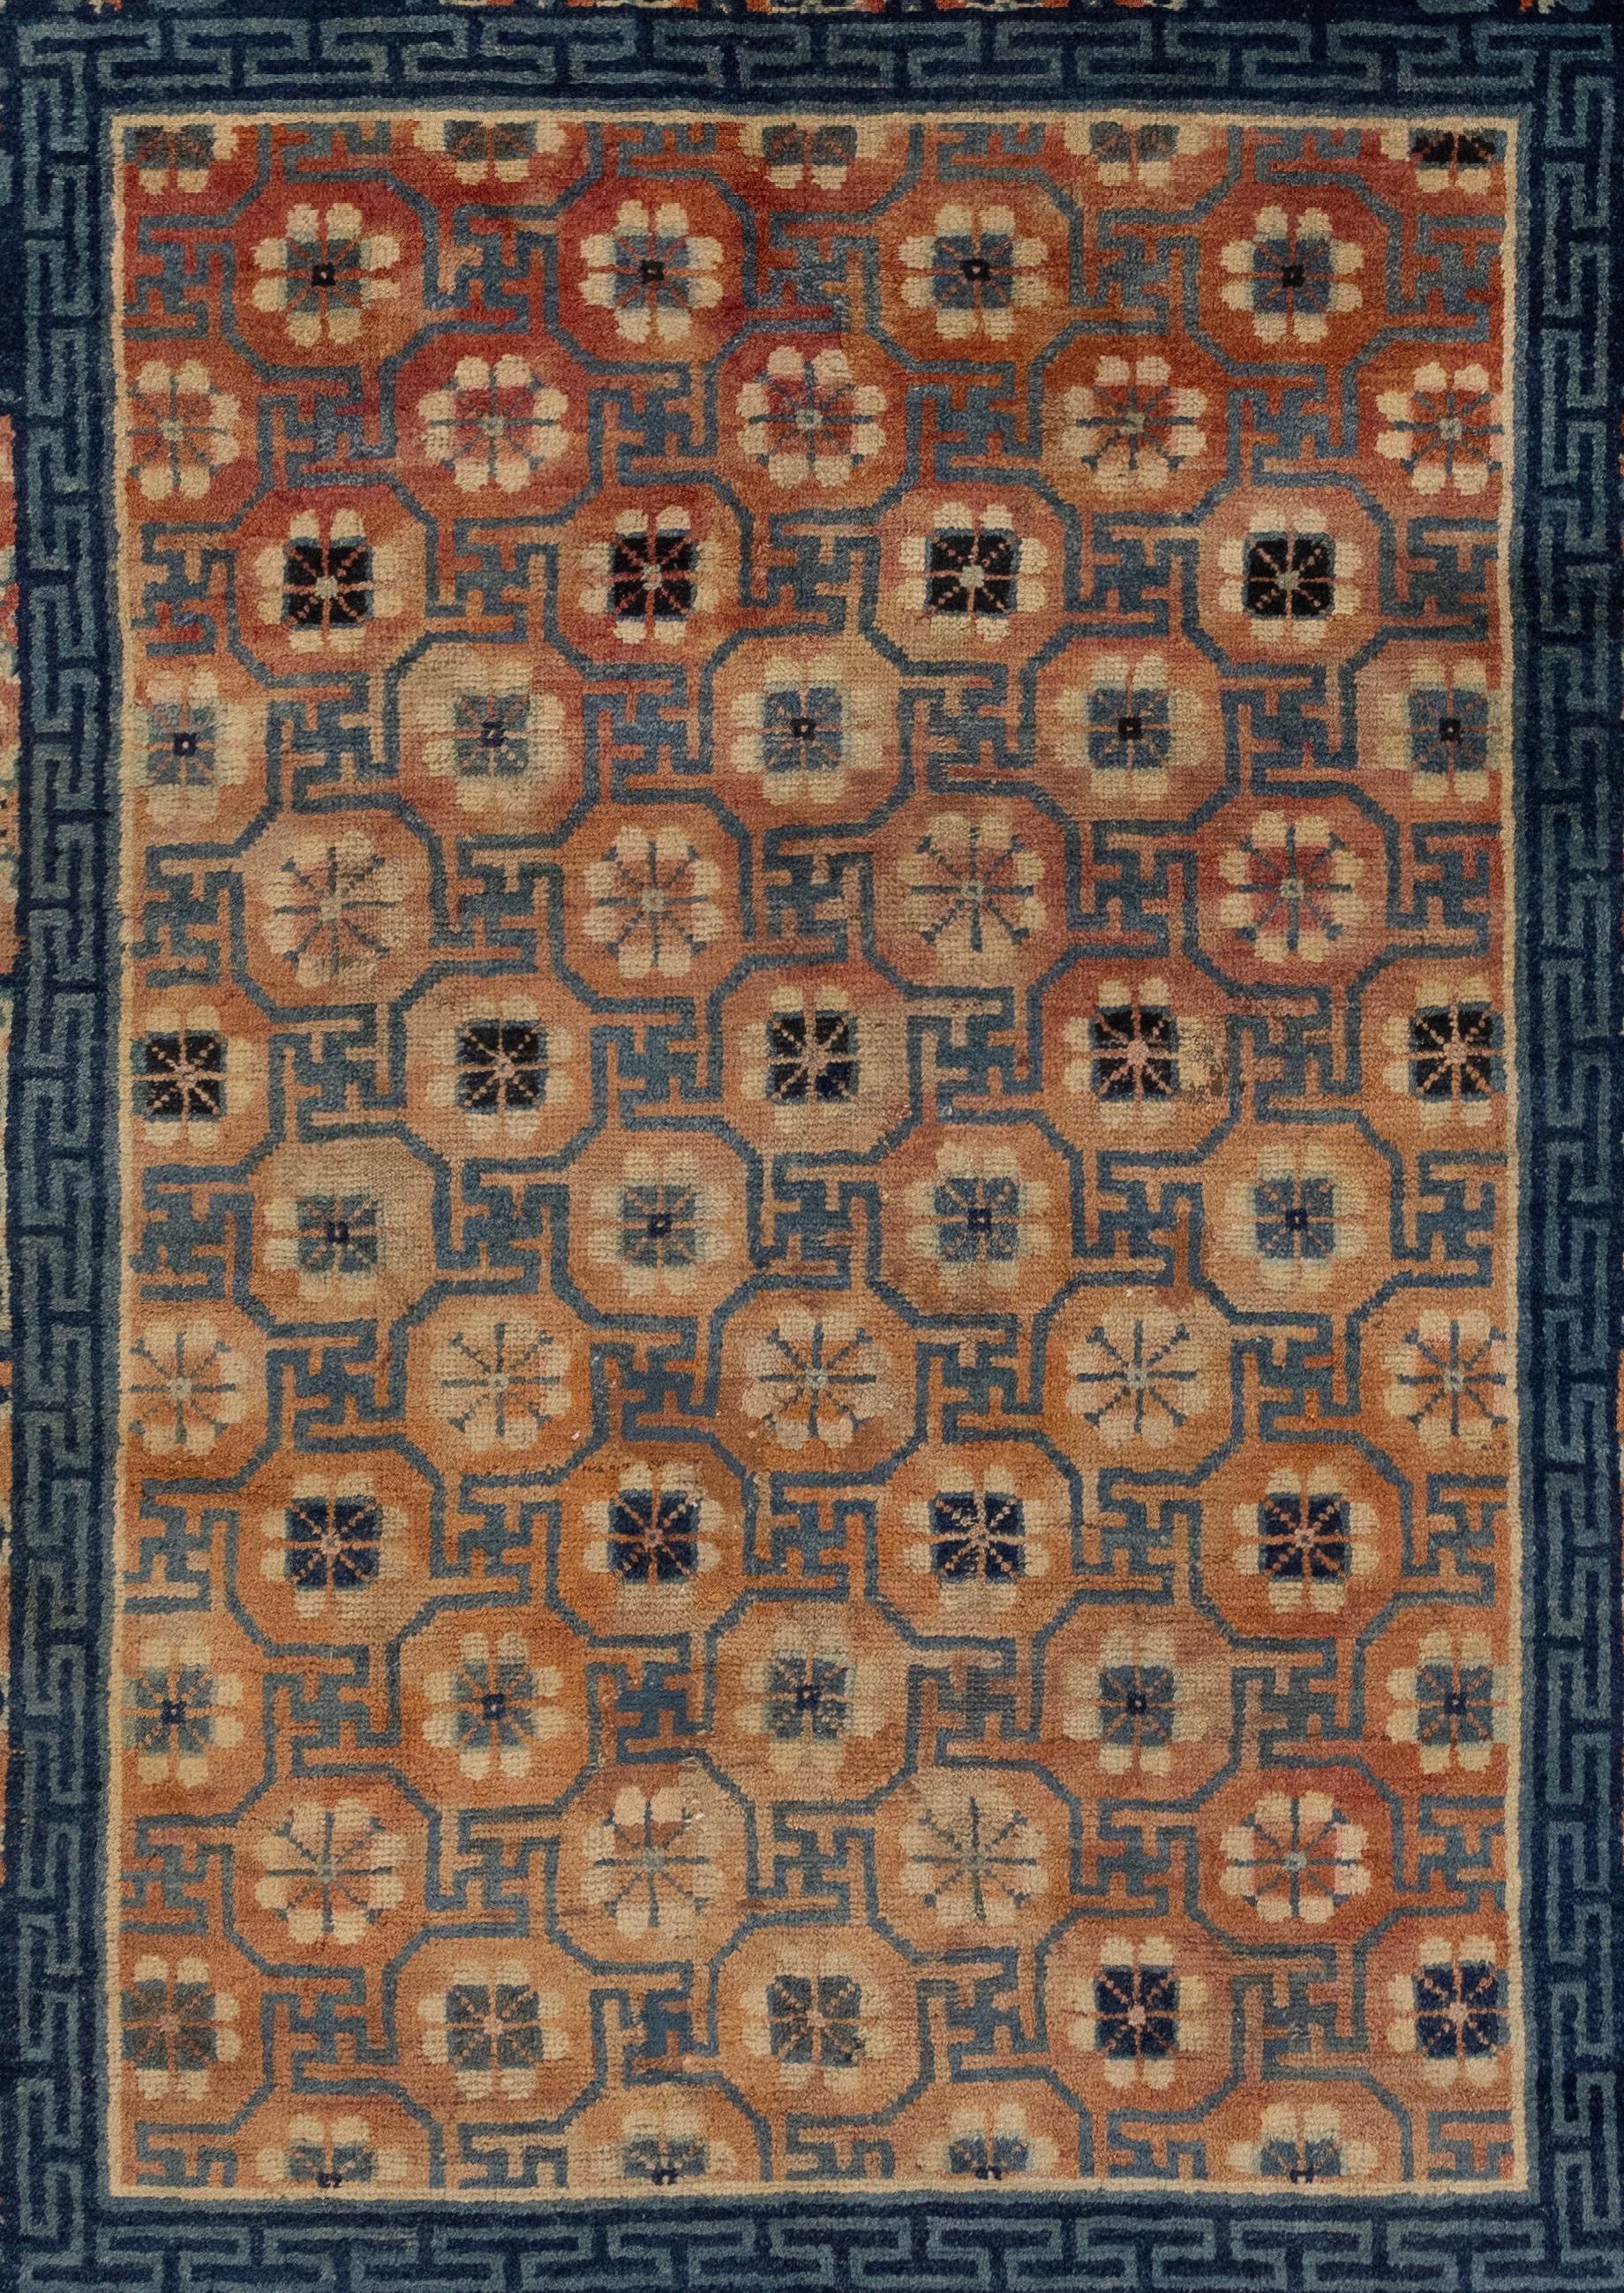 Peking Chinese rugs are a type of traditional Chinese rug that originated in the imperial court of the Ming and Qing dynasties in Beijing, China. These rugs are handcrafted with high-quality wool and silk, which gives them a soft and luxurious